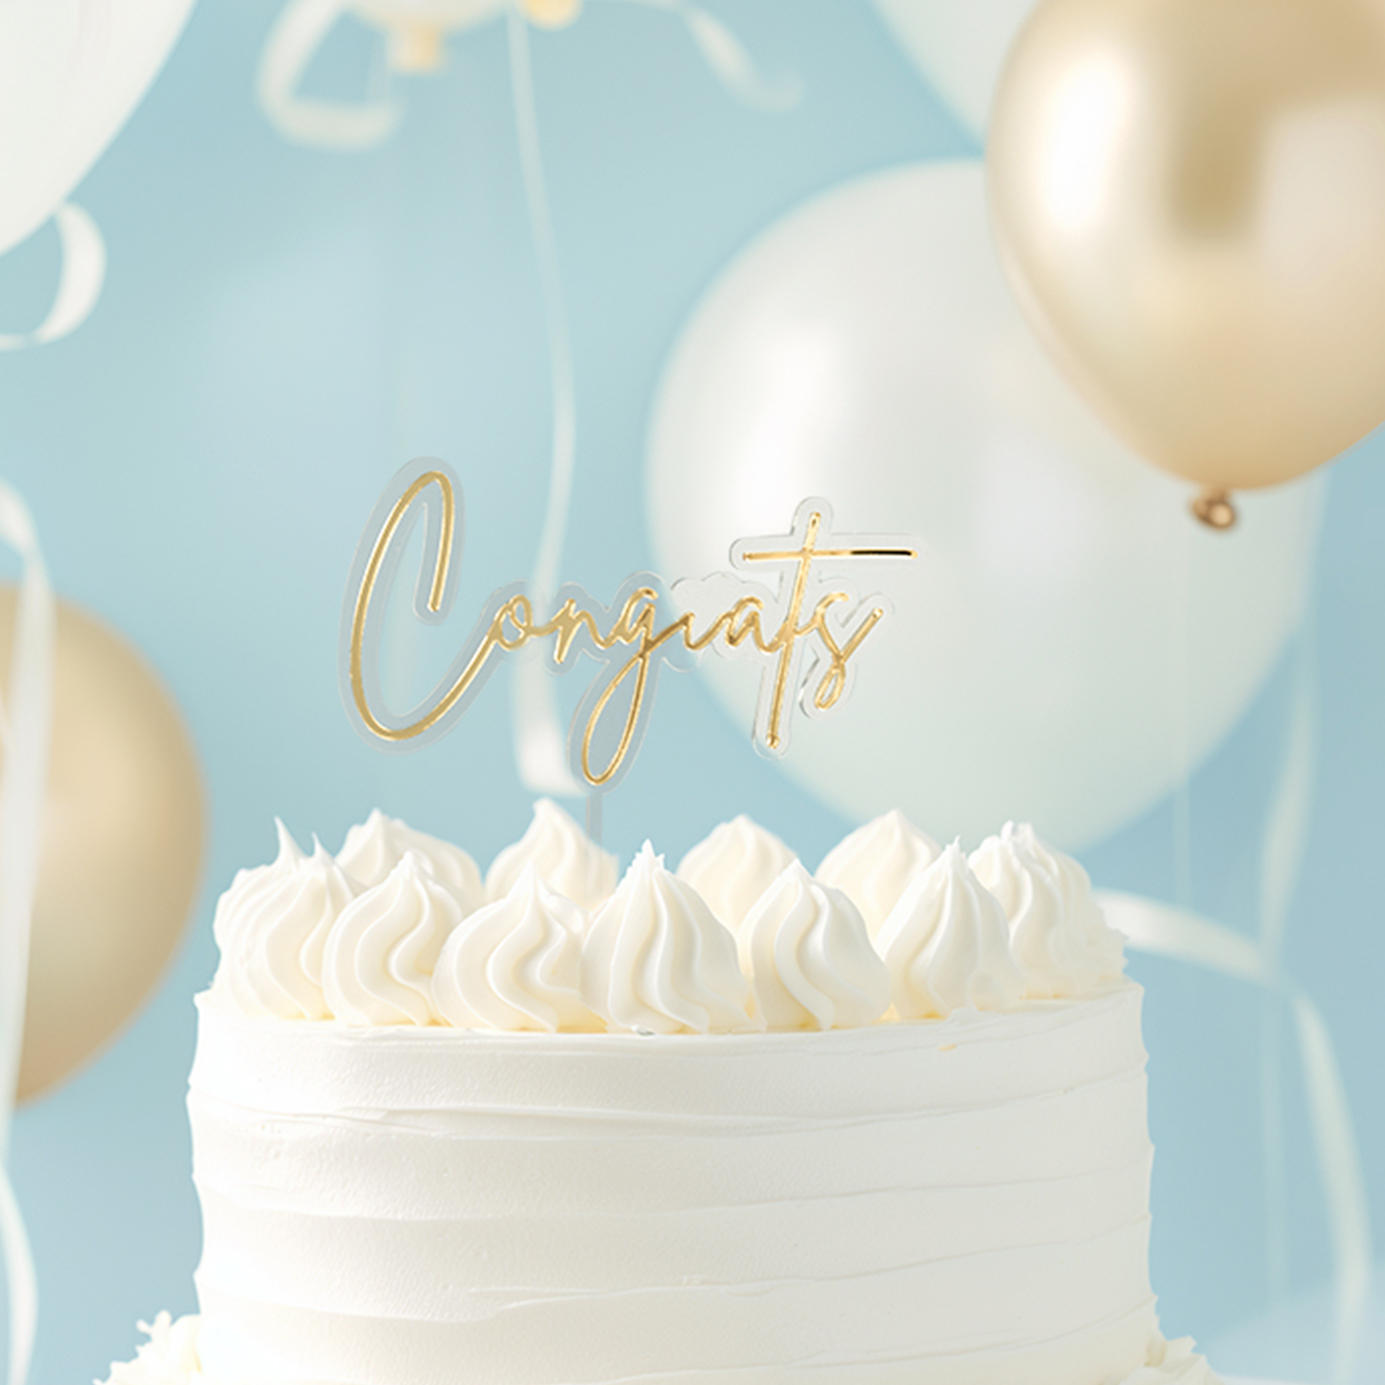 GOLD / CLEAR Layered Cake Topper - CONGRATS